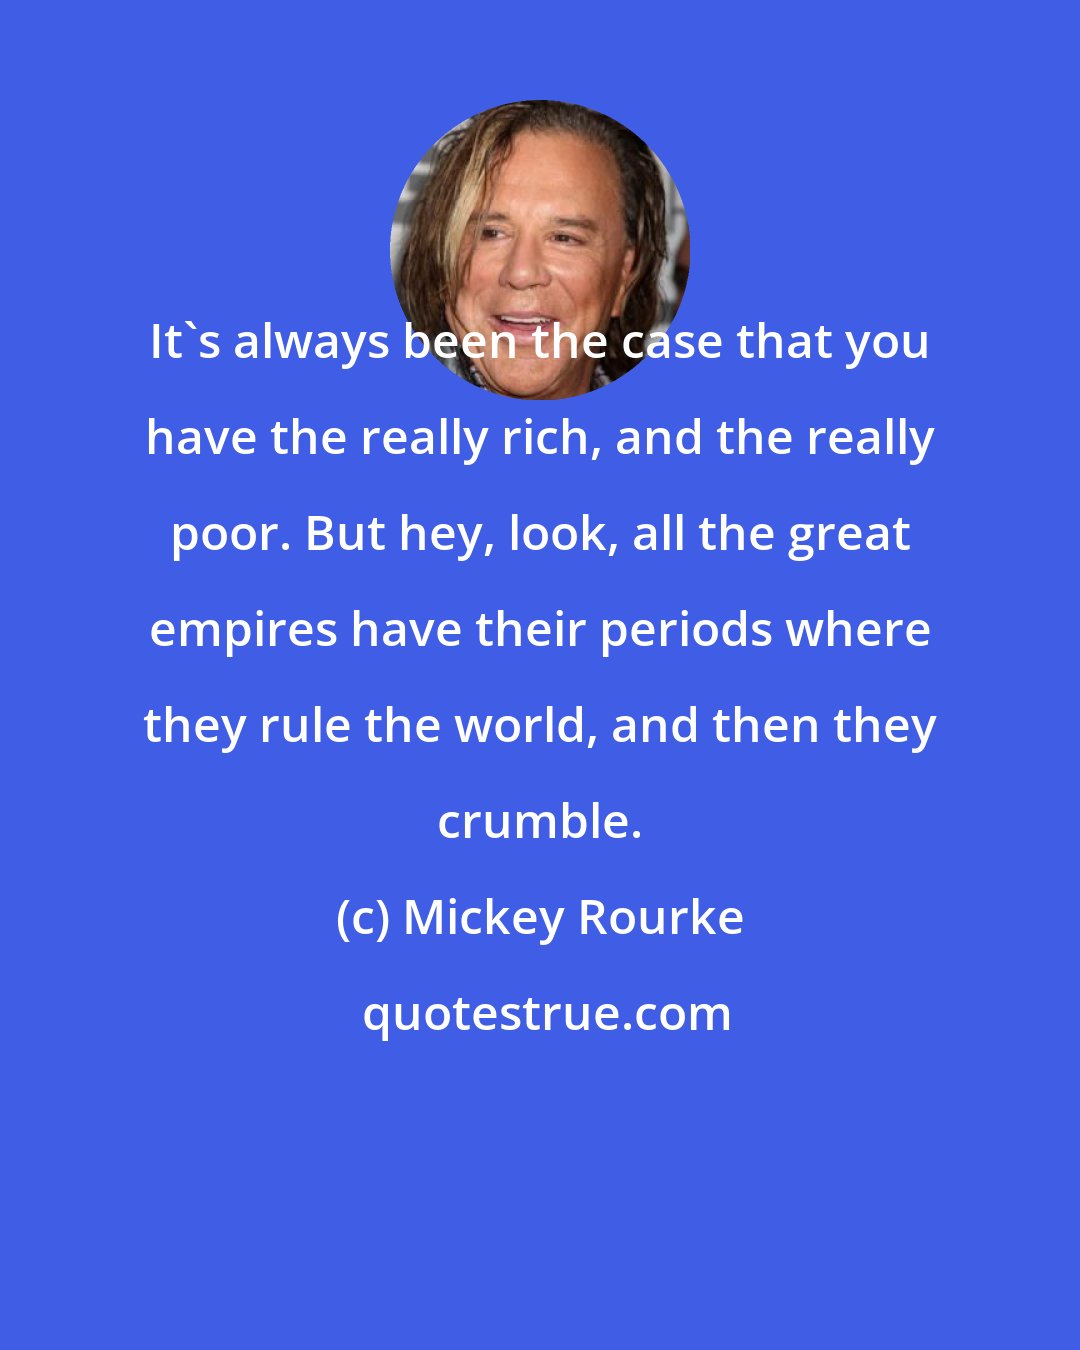 Mickey Rourke: It's always been the case that you have the really rich, and the really poor. But hey, look, all the great empires have their periods where they rule the world, and then they crumble.